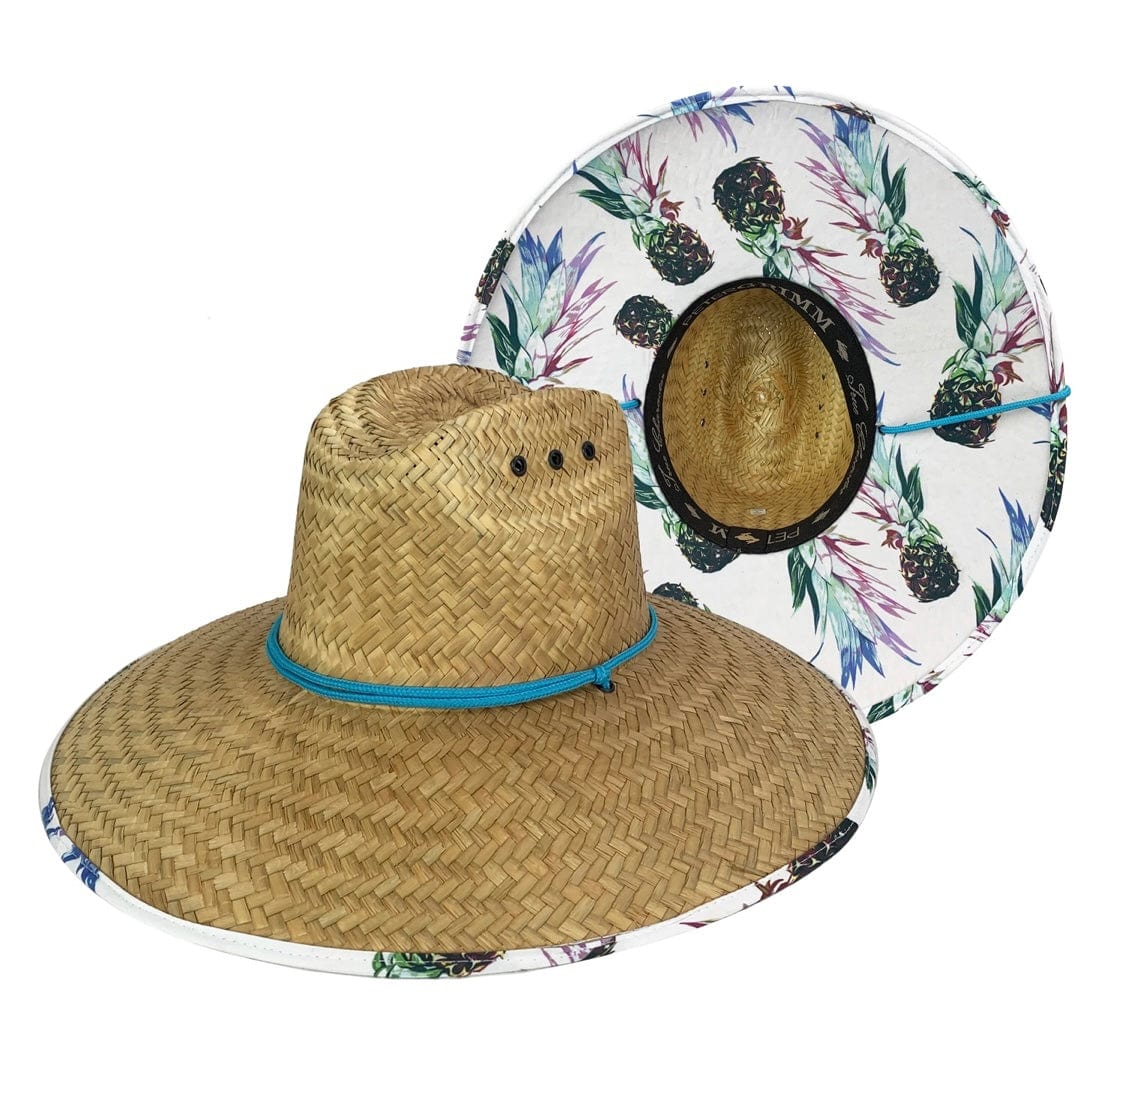 Island Girl Sun Hat Island Girl Pineapple Lifeguard Hat equestrian team apparel online tack store mobile tack store custom farm apparel custom show stable clothing equestrian lifestyle horse show clothing riding clothes Bananas lifeguard horses equestrian tack store